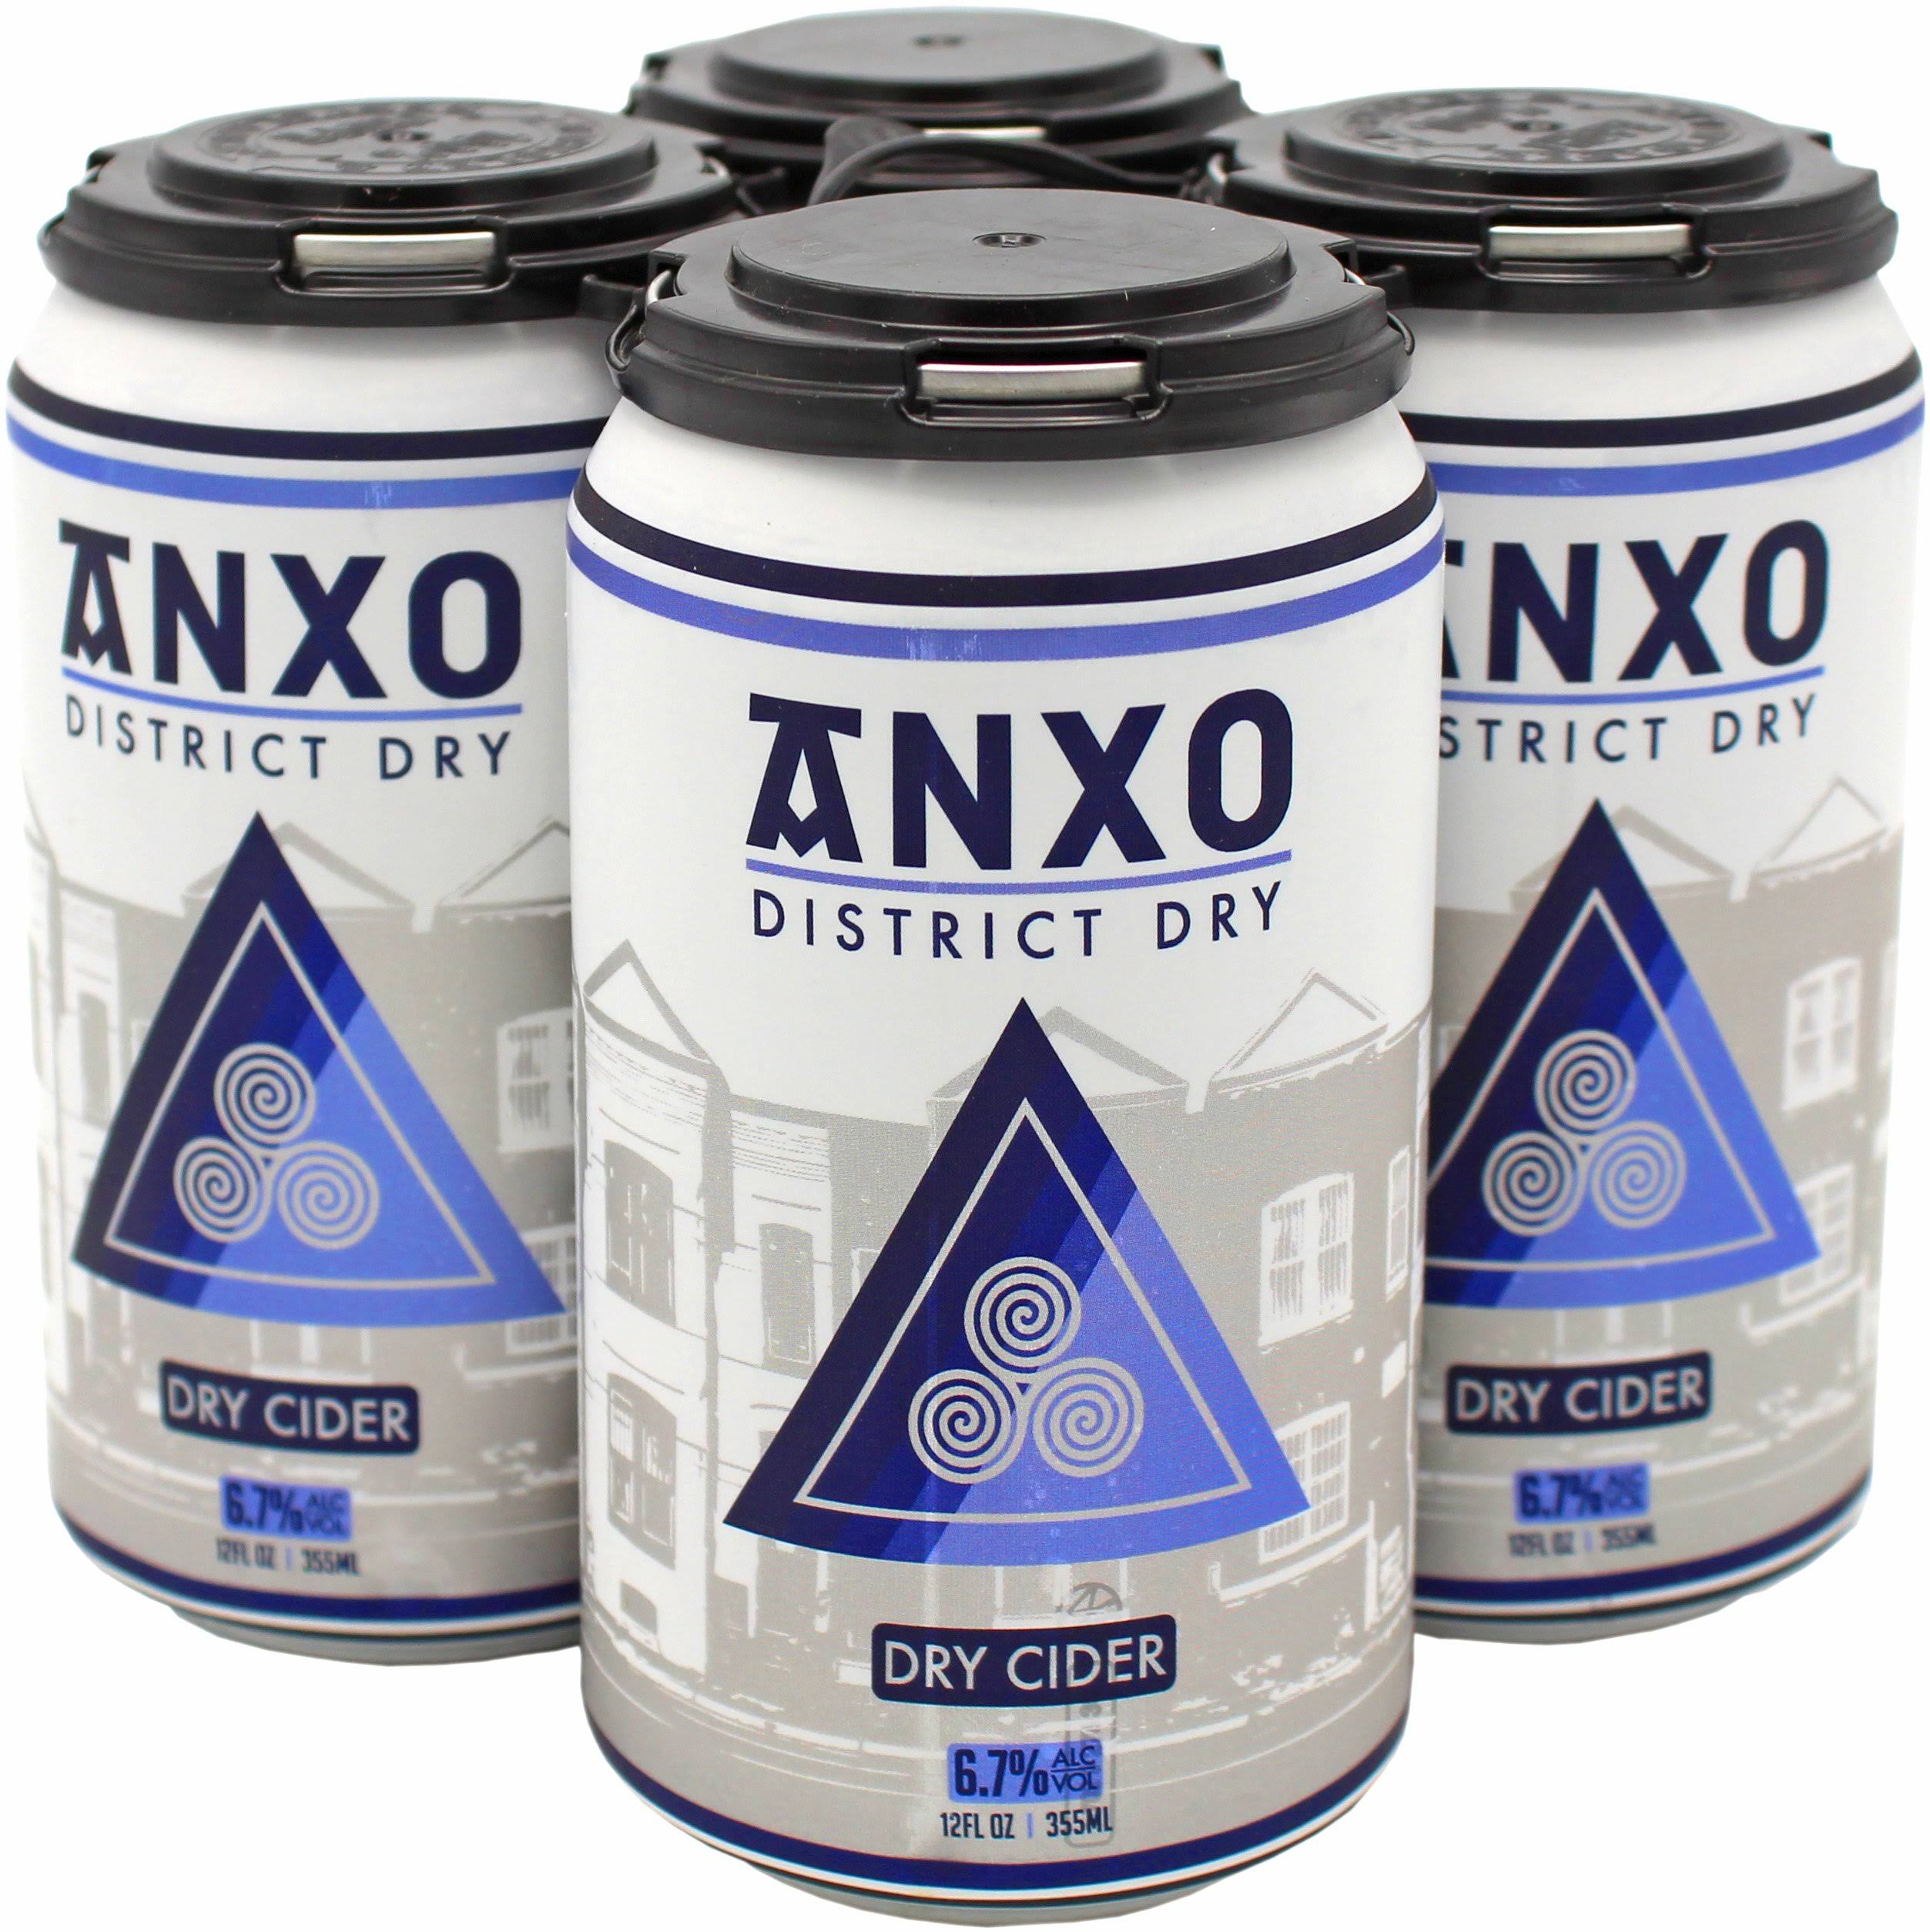 Anxo District Dry Cider